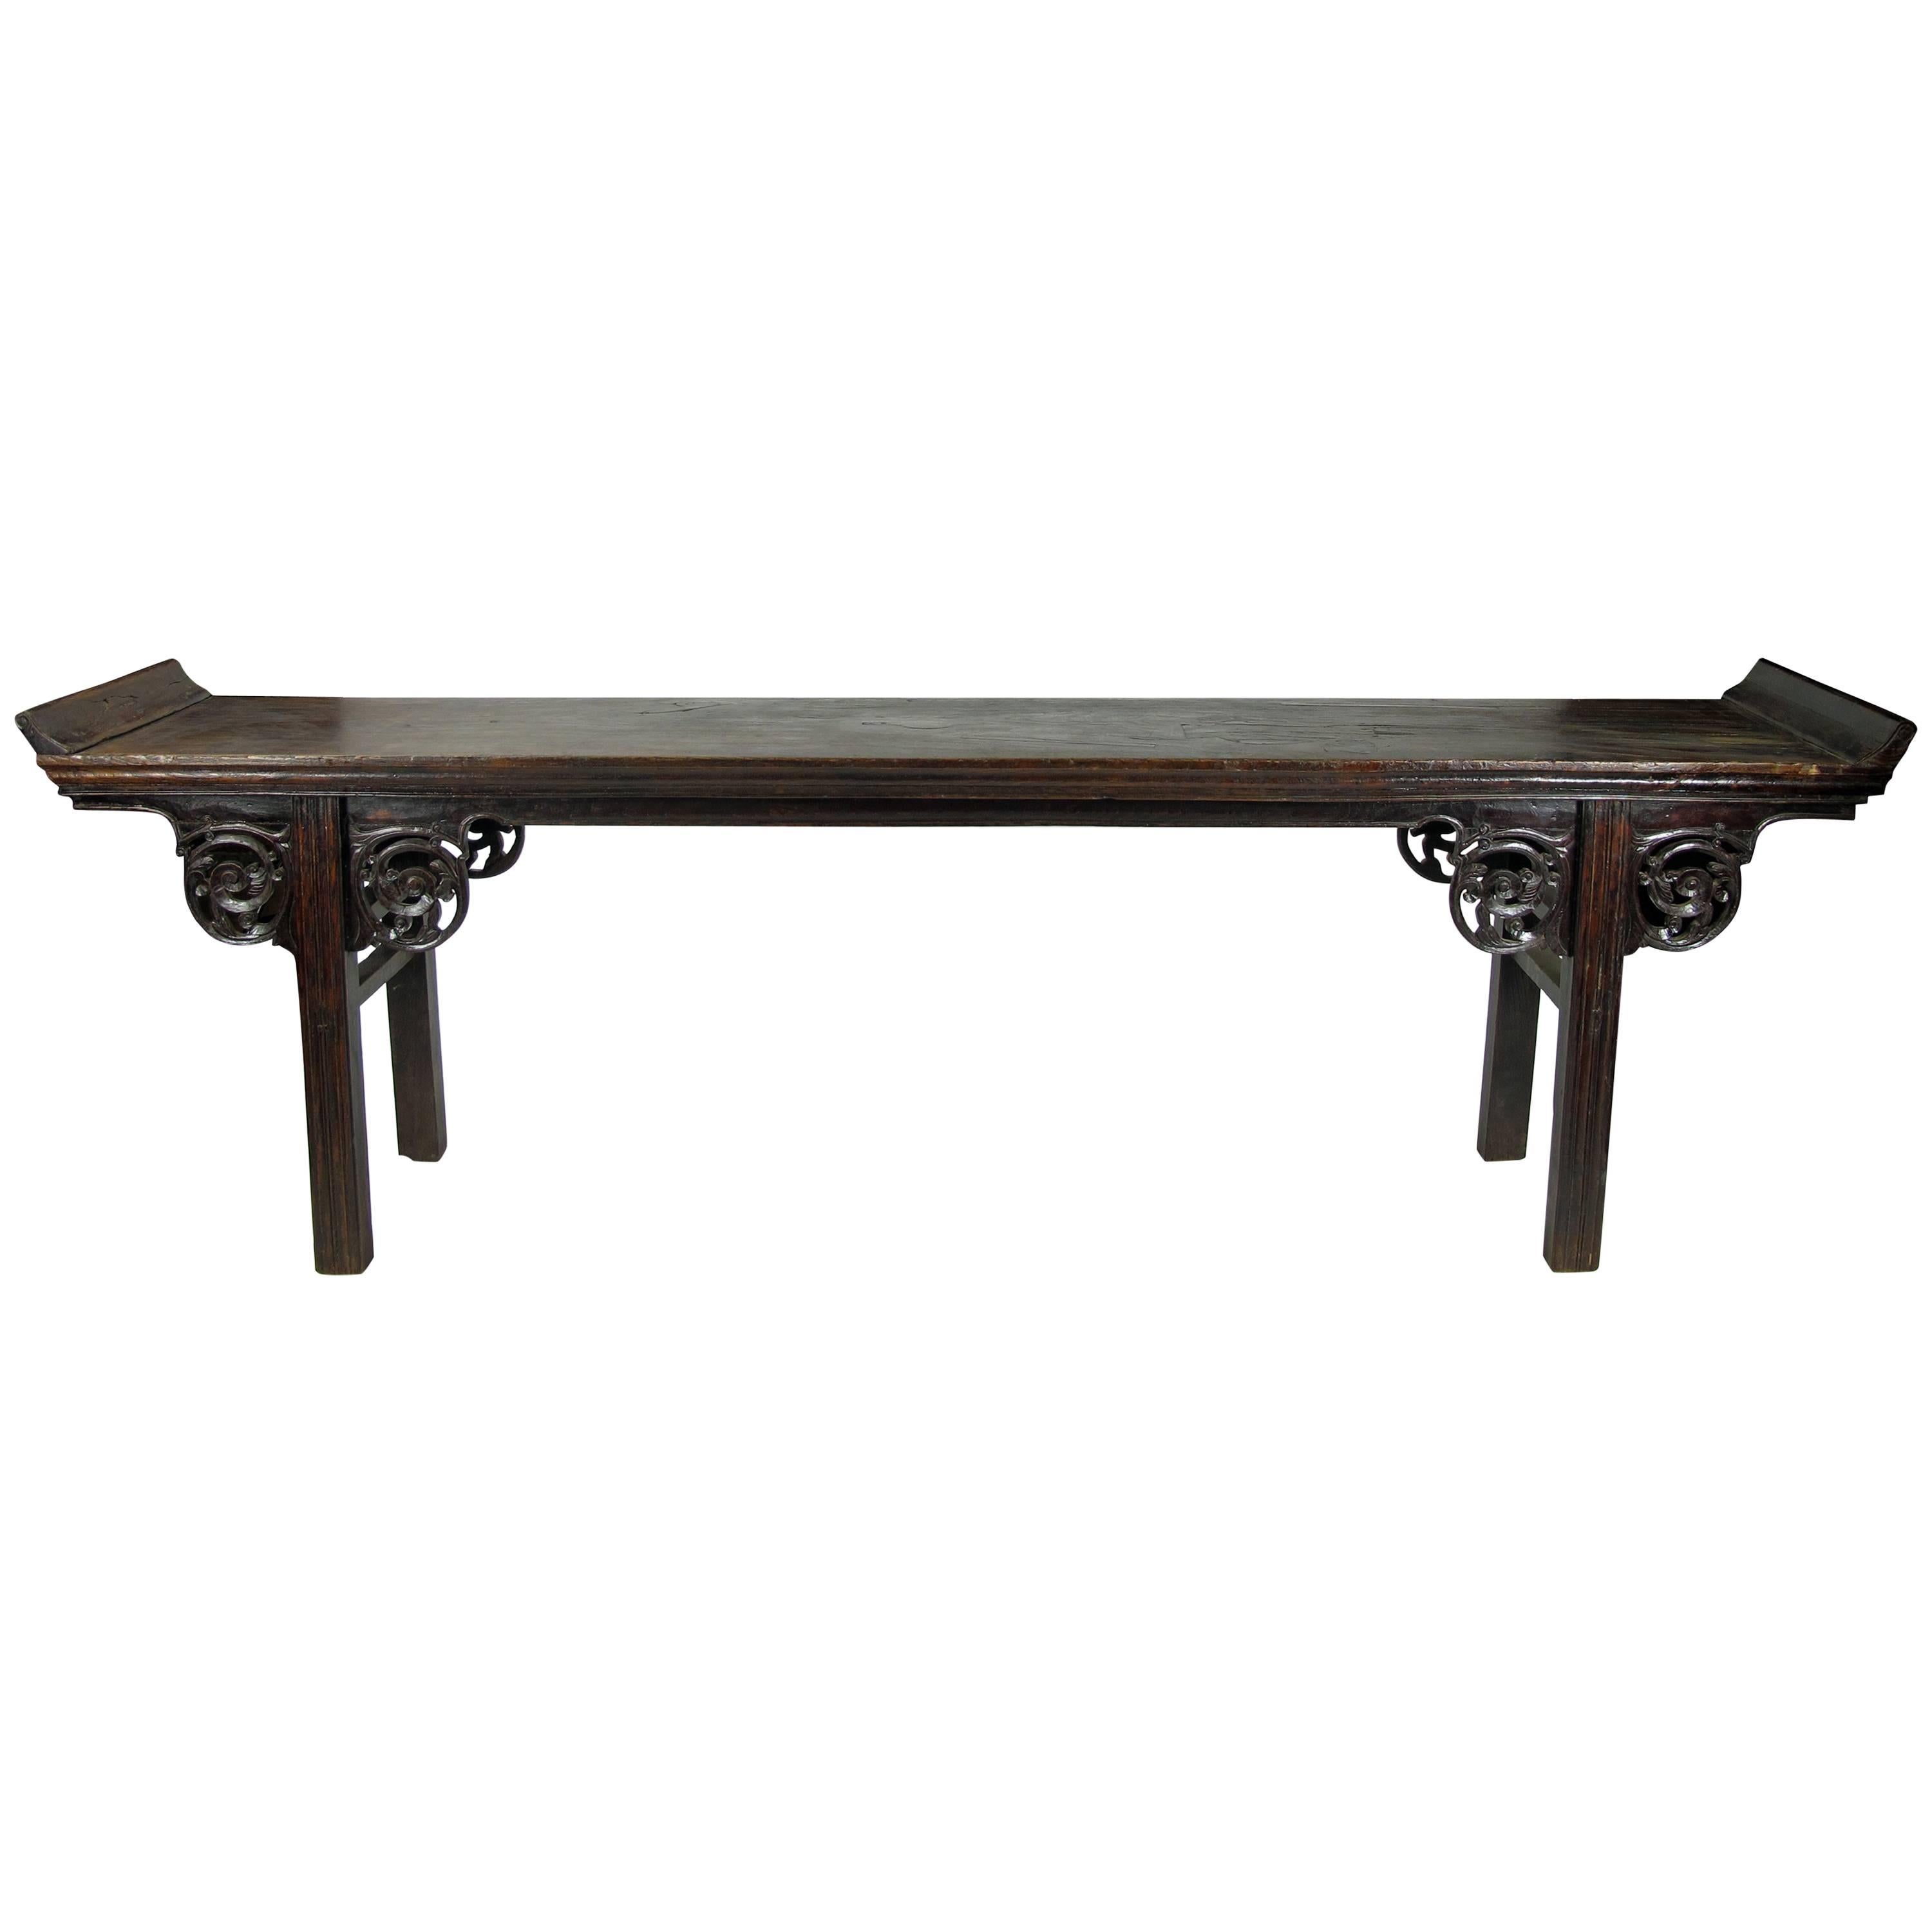 Splendid Early 19th Century Chinese Elmwood Altar or Console Table